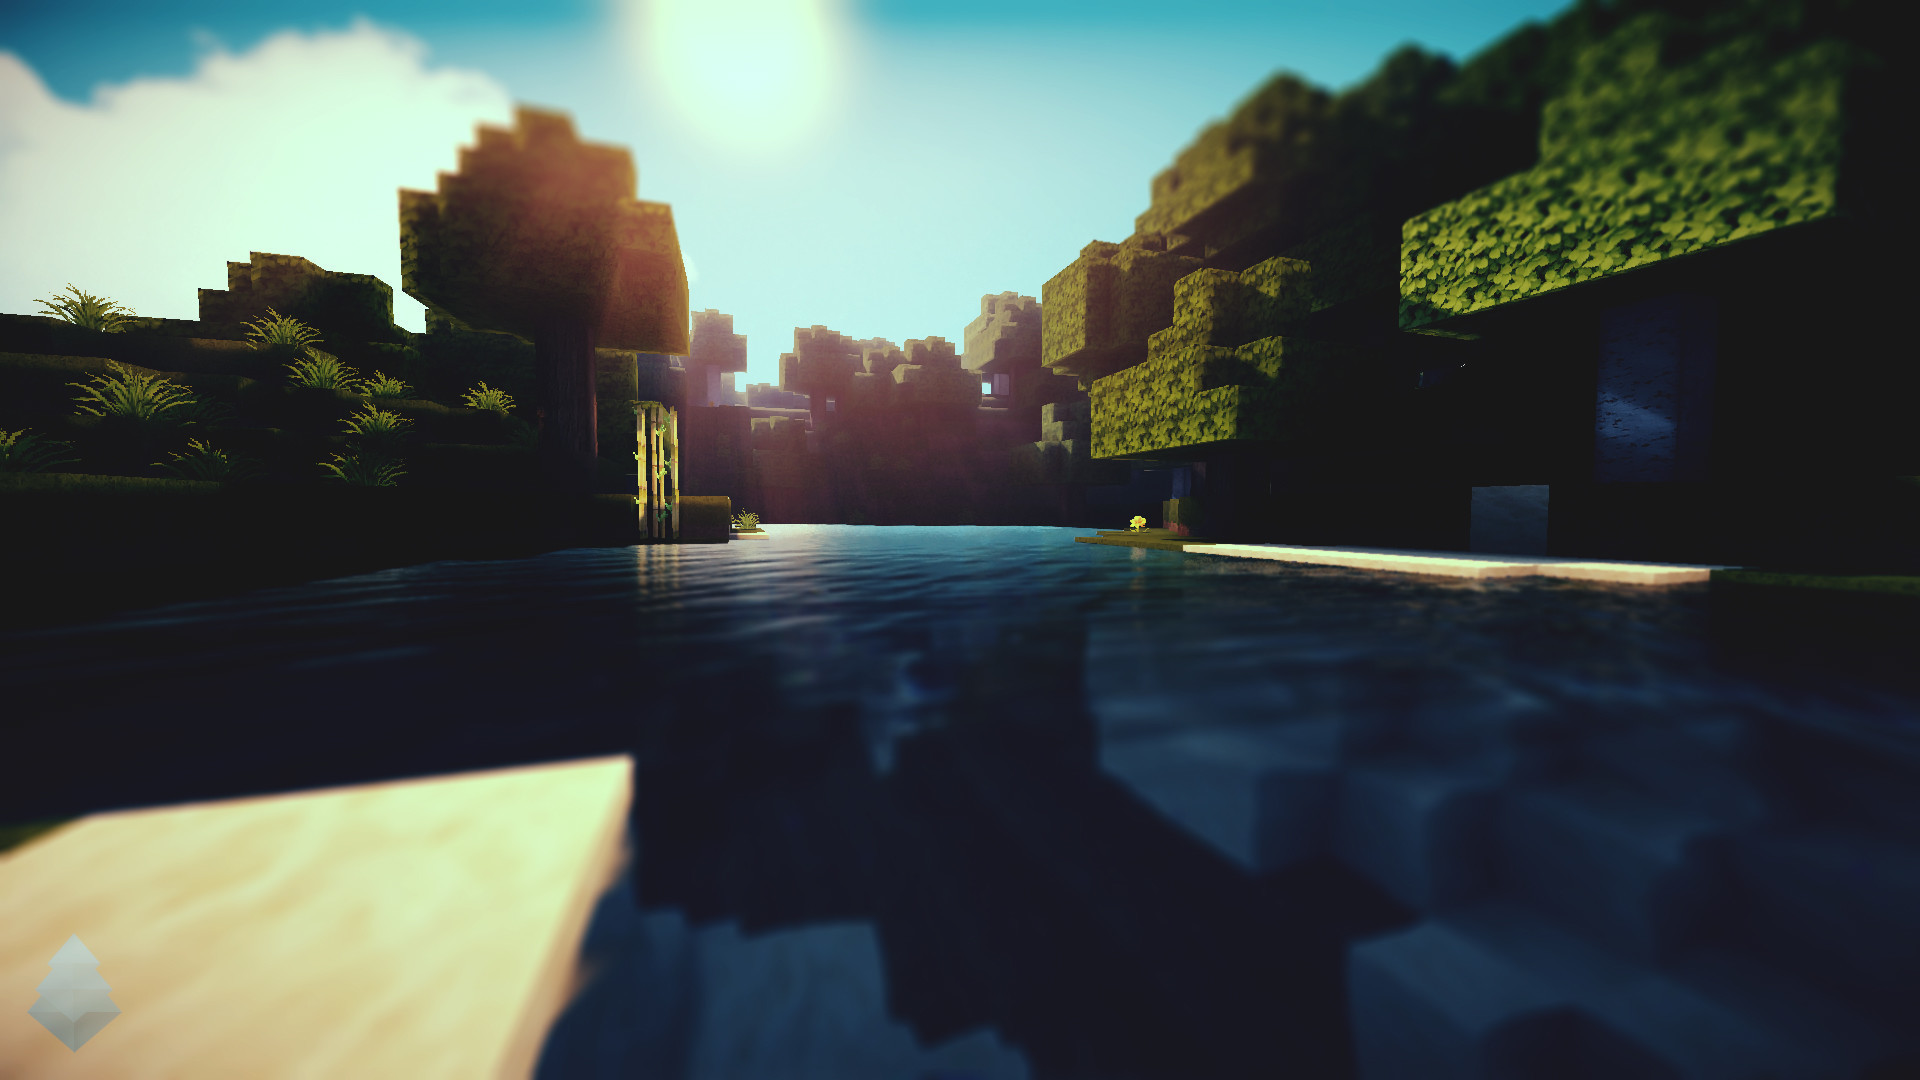 1920x1080 Cool Minecraft Backgrounds hdwys 